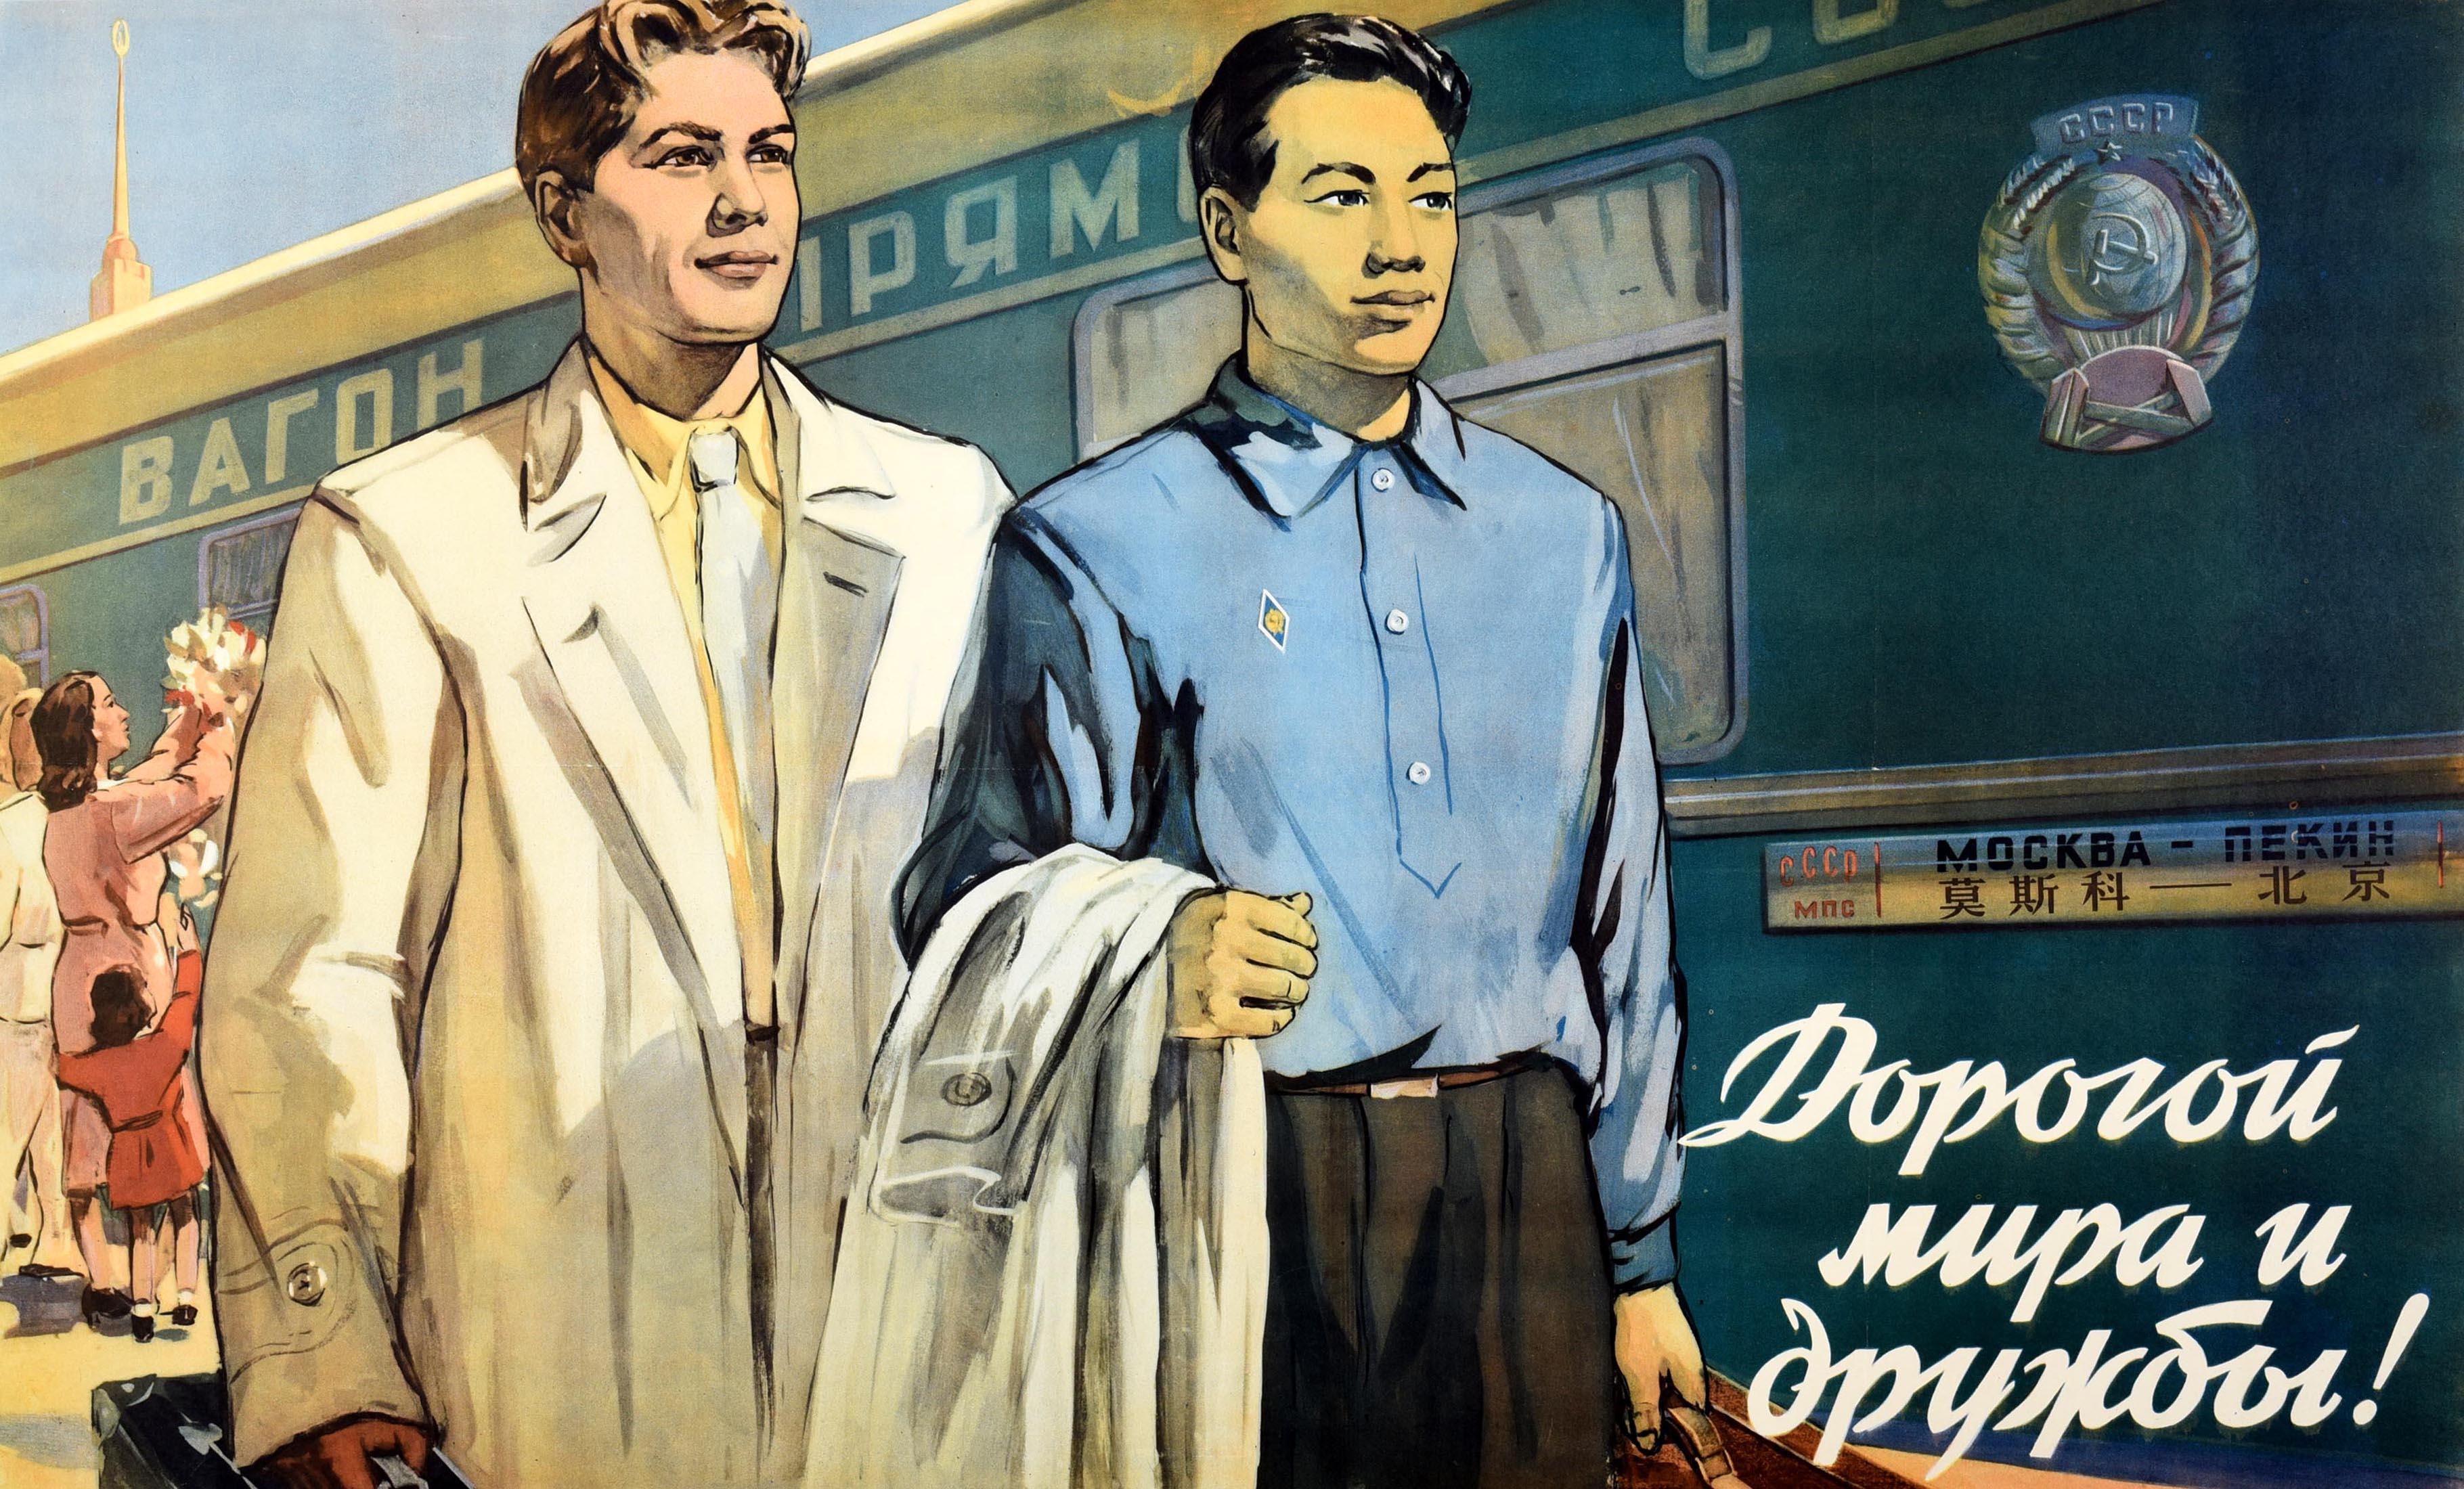 Original vintage Soviet propaganda poster promoting friendship and peace between China and the Soviet Union featuring two men walking in front of a train at a railway station with people holding flowers behind them, the CCCP / USSR emblem on the